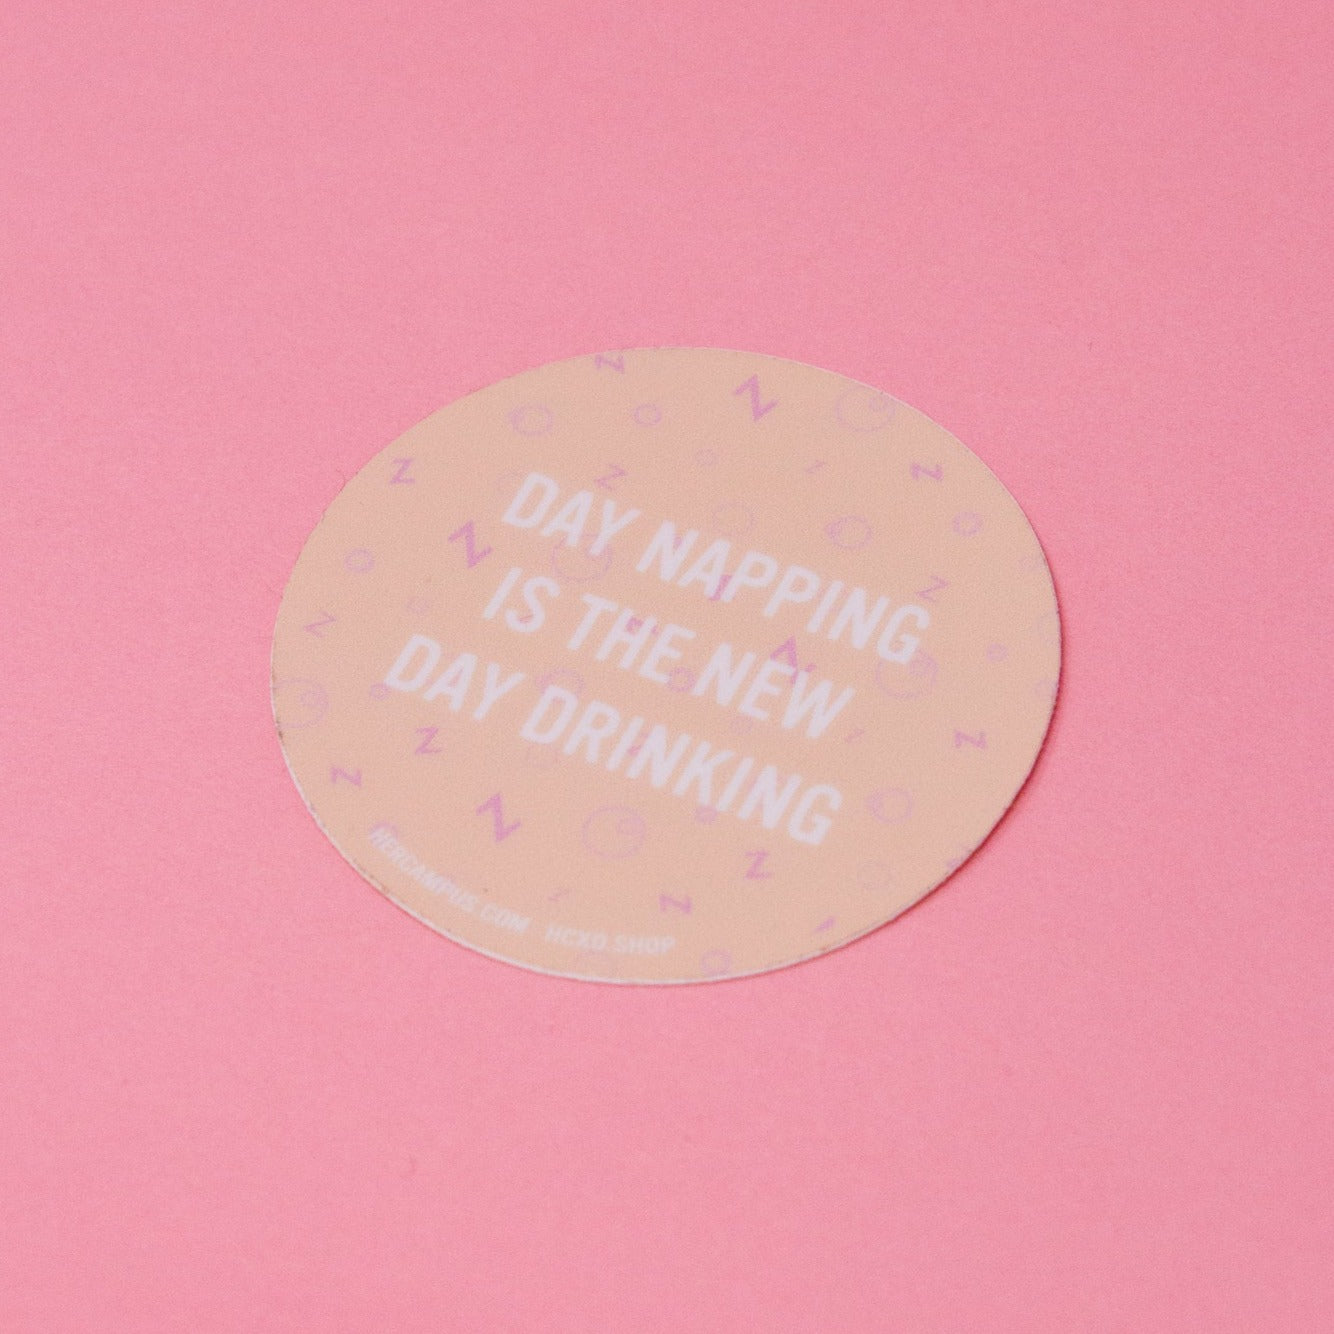 Day Napping Sticker